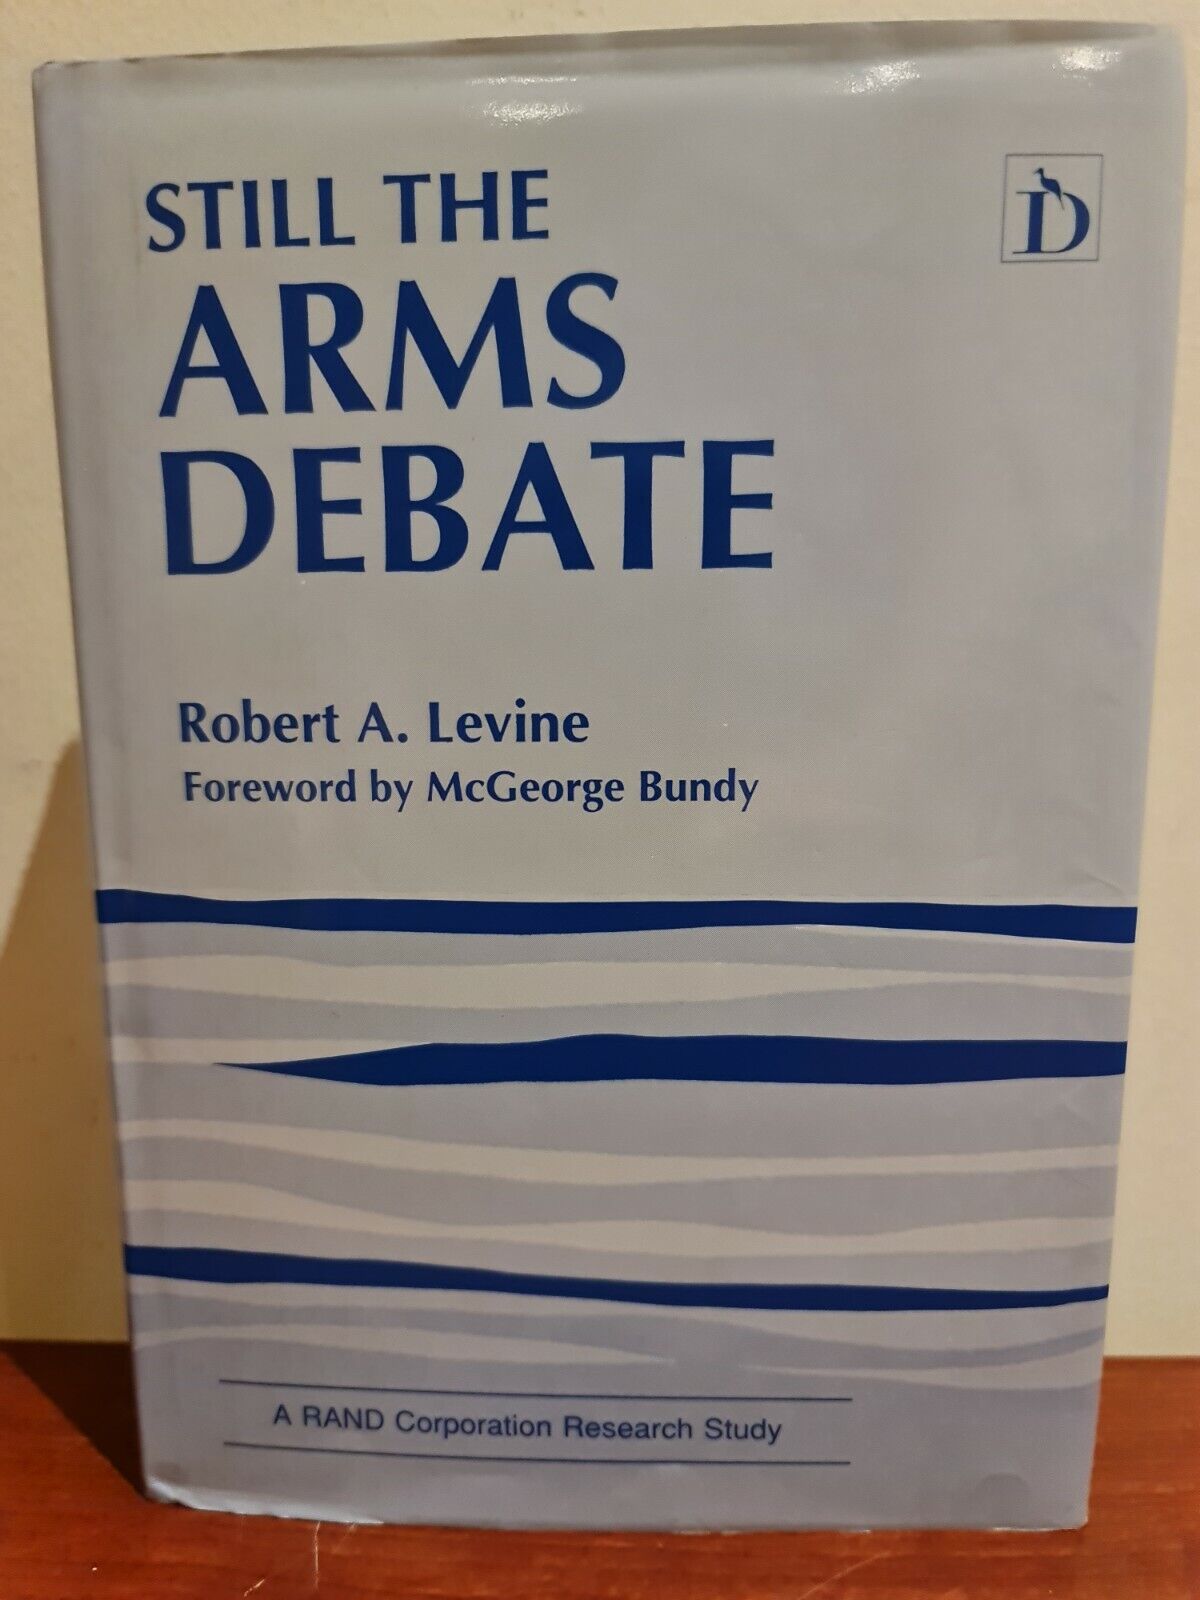 Still the Arms Debate by Robert A. Levine (1990)